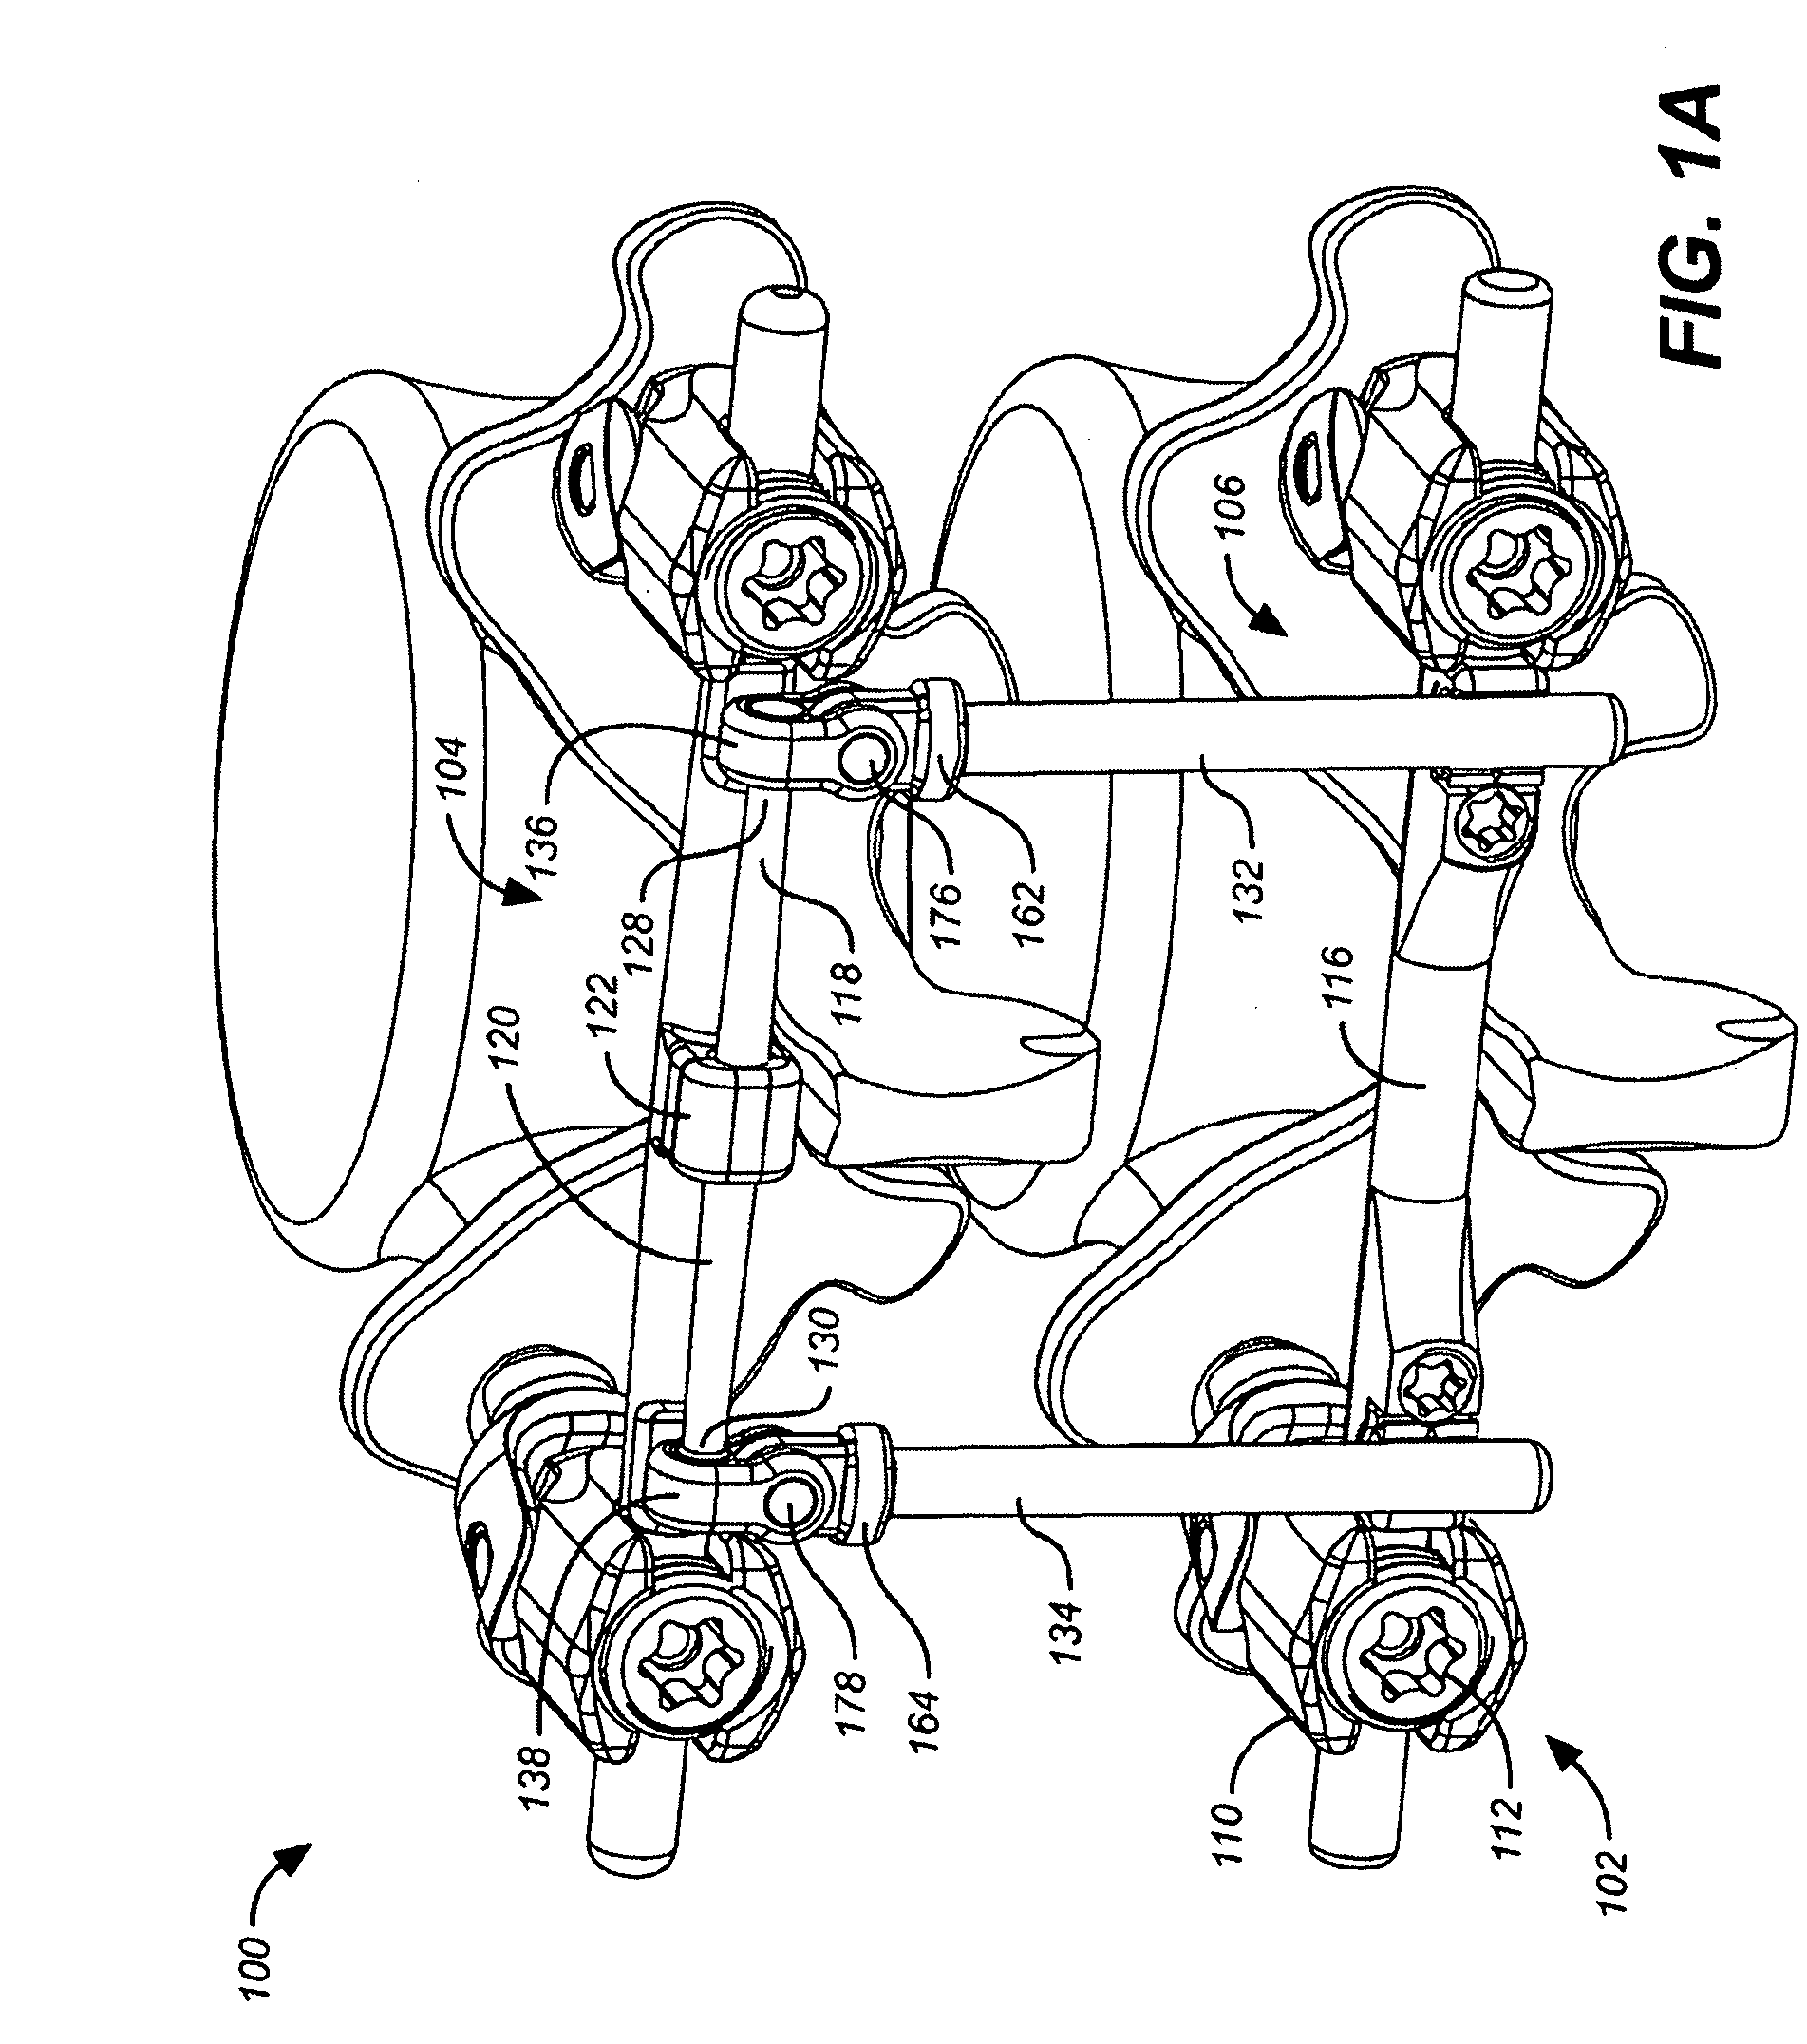 Dual deflection rod system for a dynamic stabilization and motion preservation spinal implantation system and method